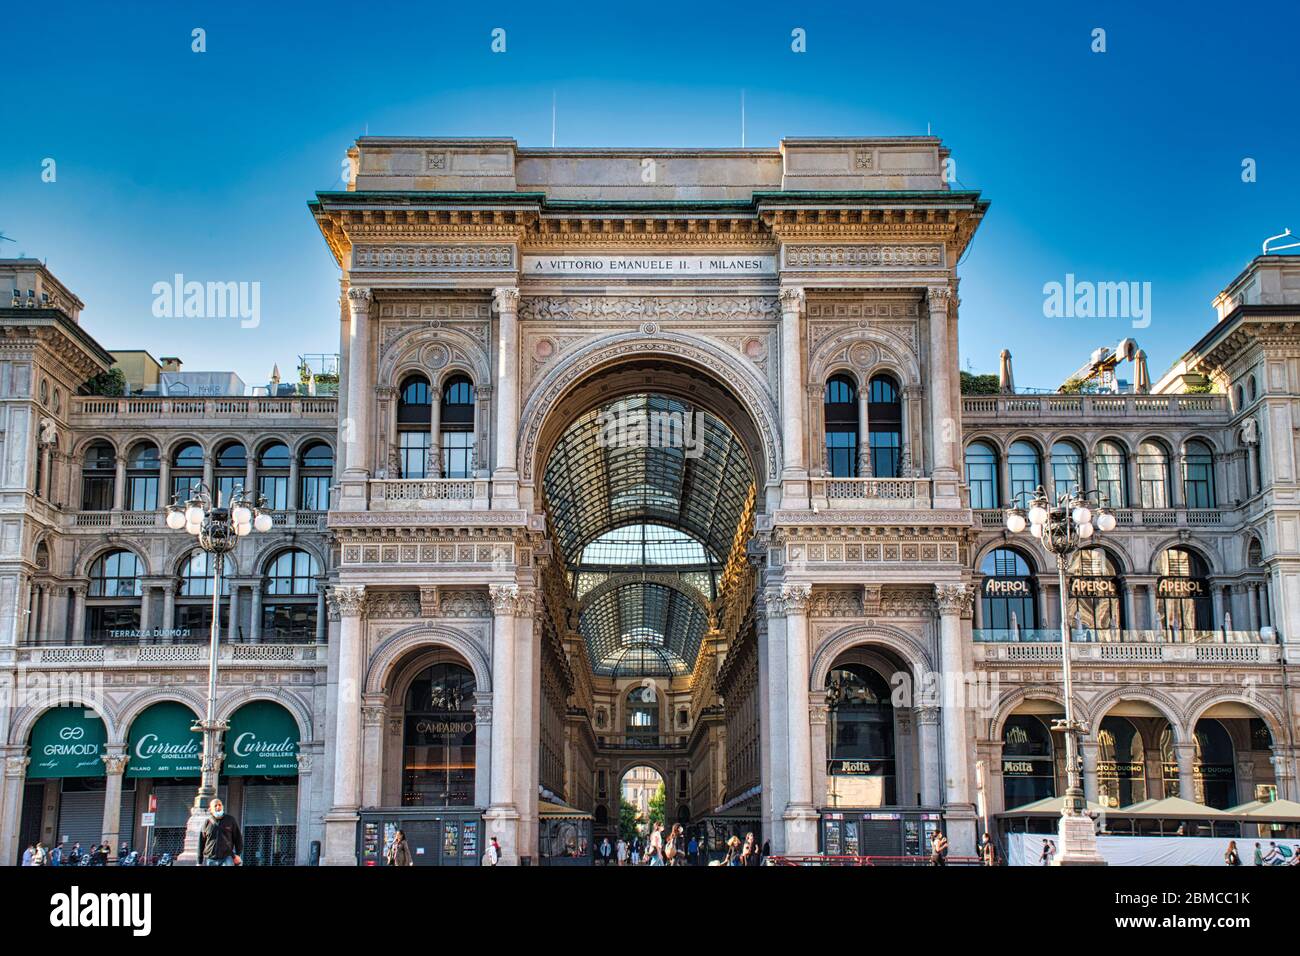 Milan, Italy May 8, 2020: The golden sunshine is reflecting on the front of the magnificent triumphal arch entrance of the Galleria Vittorio Emanuele Stock Photo